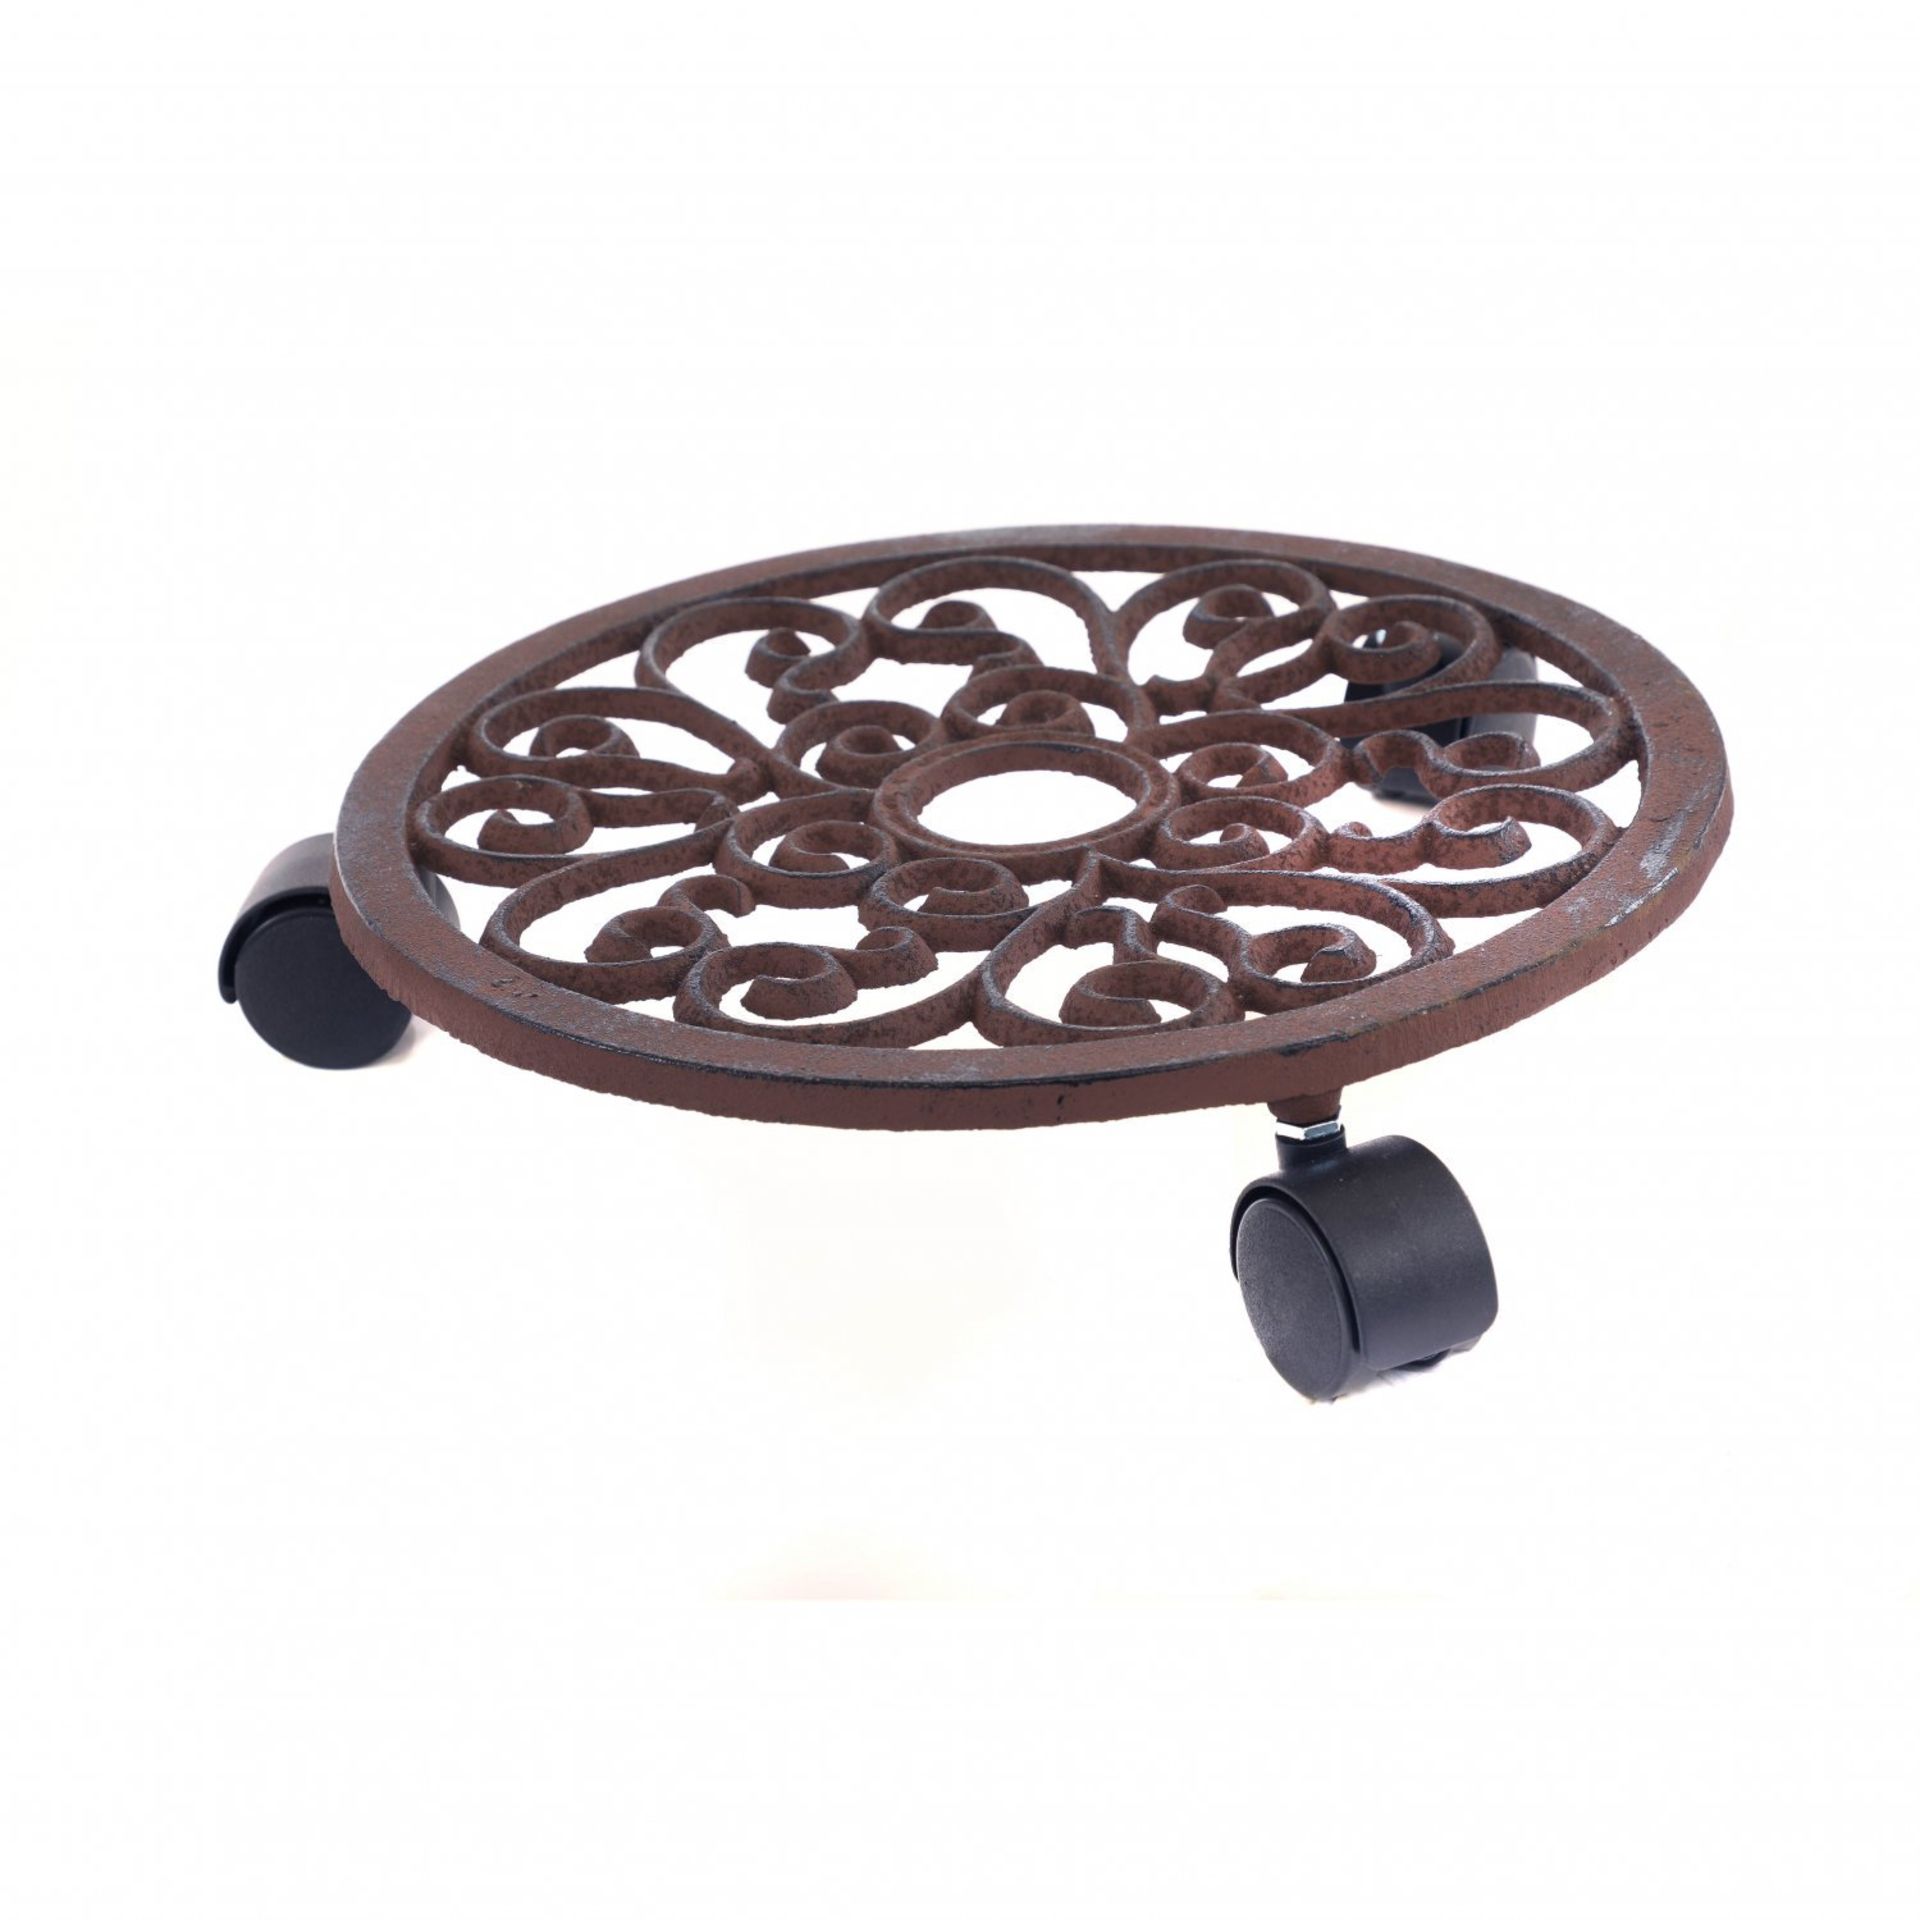 (KK167) 12" Cast Iron Plant Flower Pot Mobile Mover Trolley Stand The plant pot trolley al... - Image 2 of 2